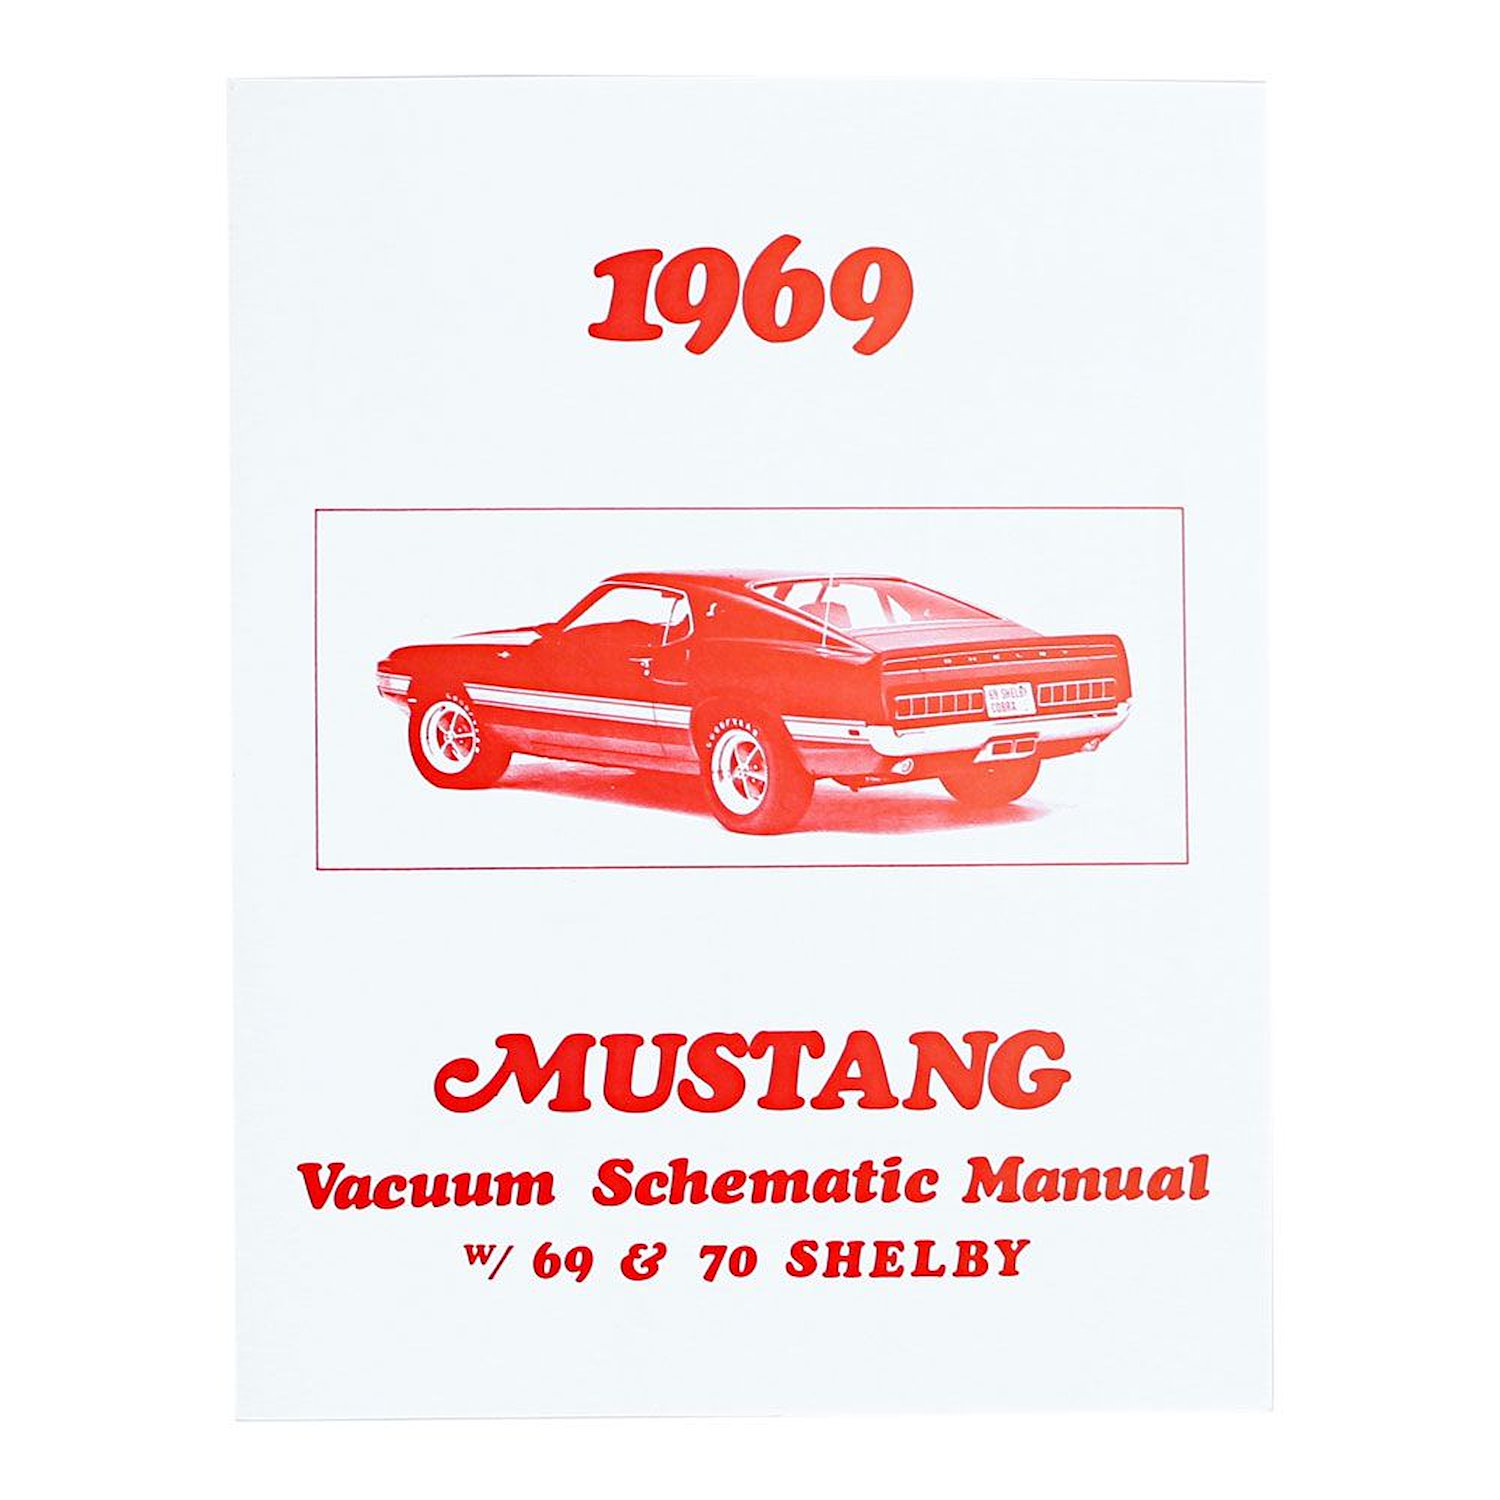 Vacuum Schematic Manual for 1969 Ford Mustang